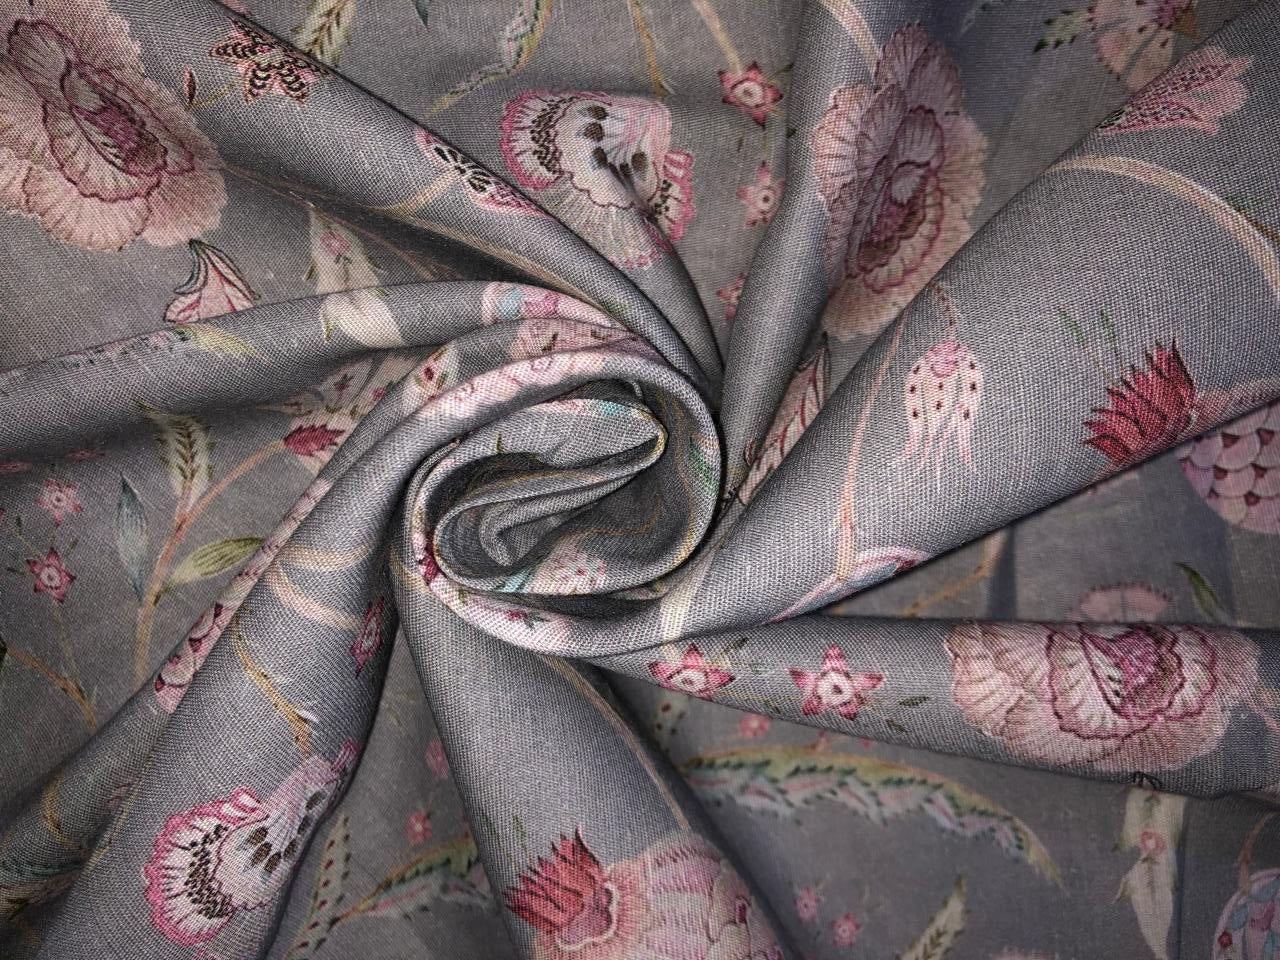 100% linen FLORAL digital print fabric 44" wide available in 2 colors grey/pink and ivory/pink